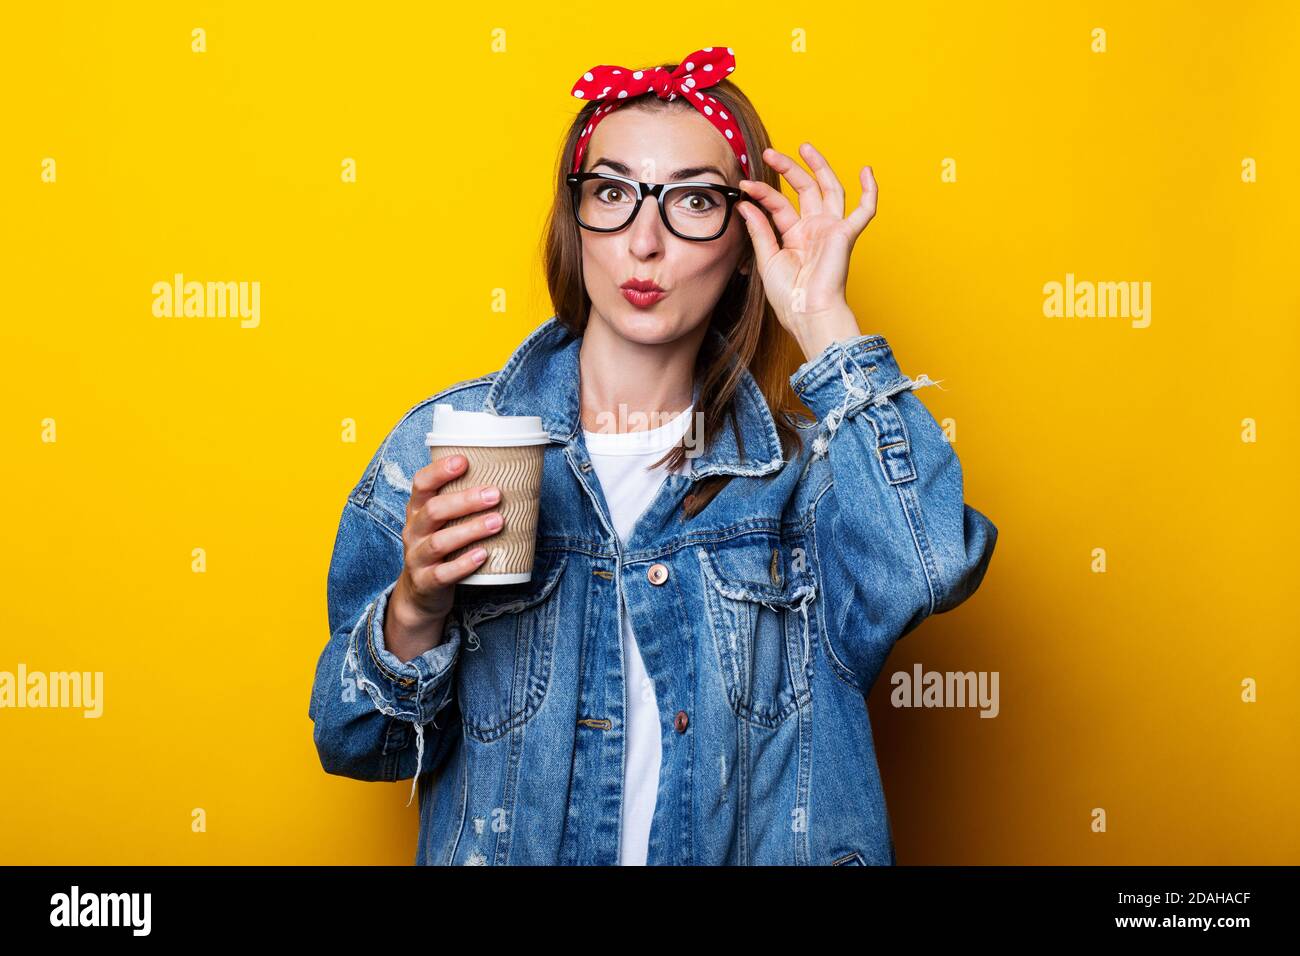 Young woman in denim jacket, headband and glasses holding paper cup in hands on yellow background Stock Photo